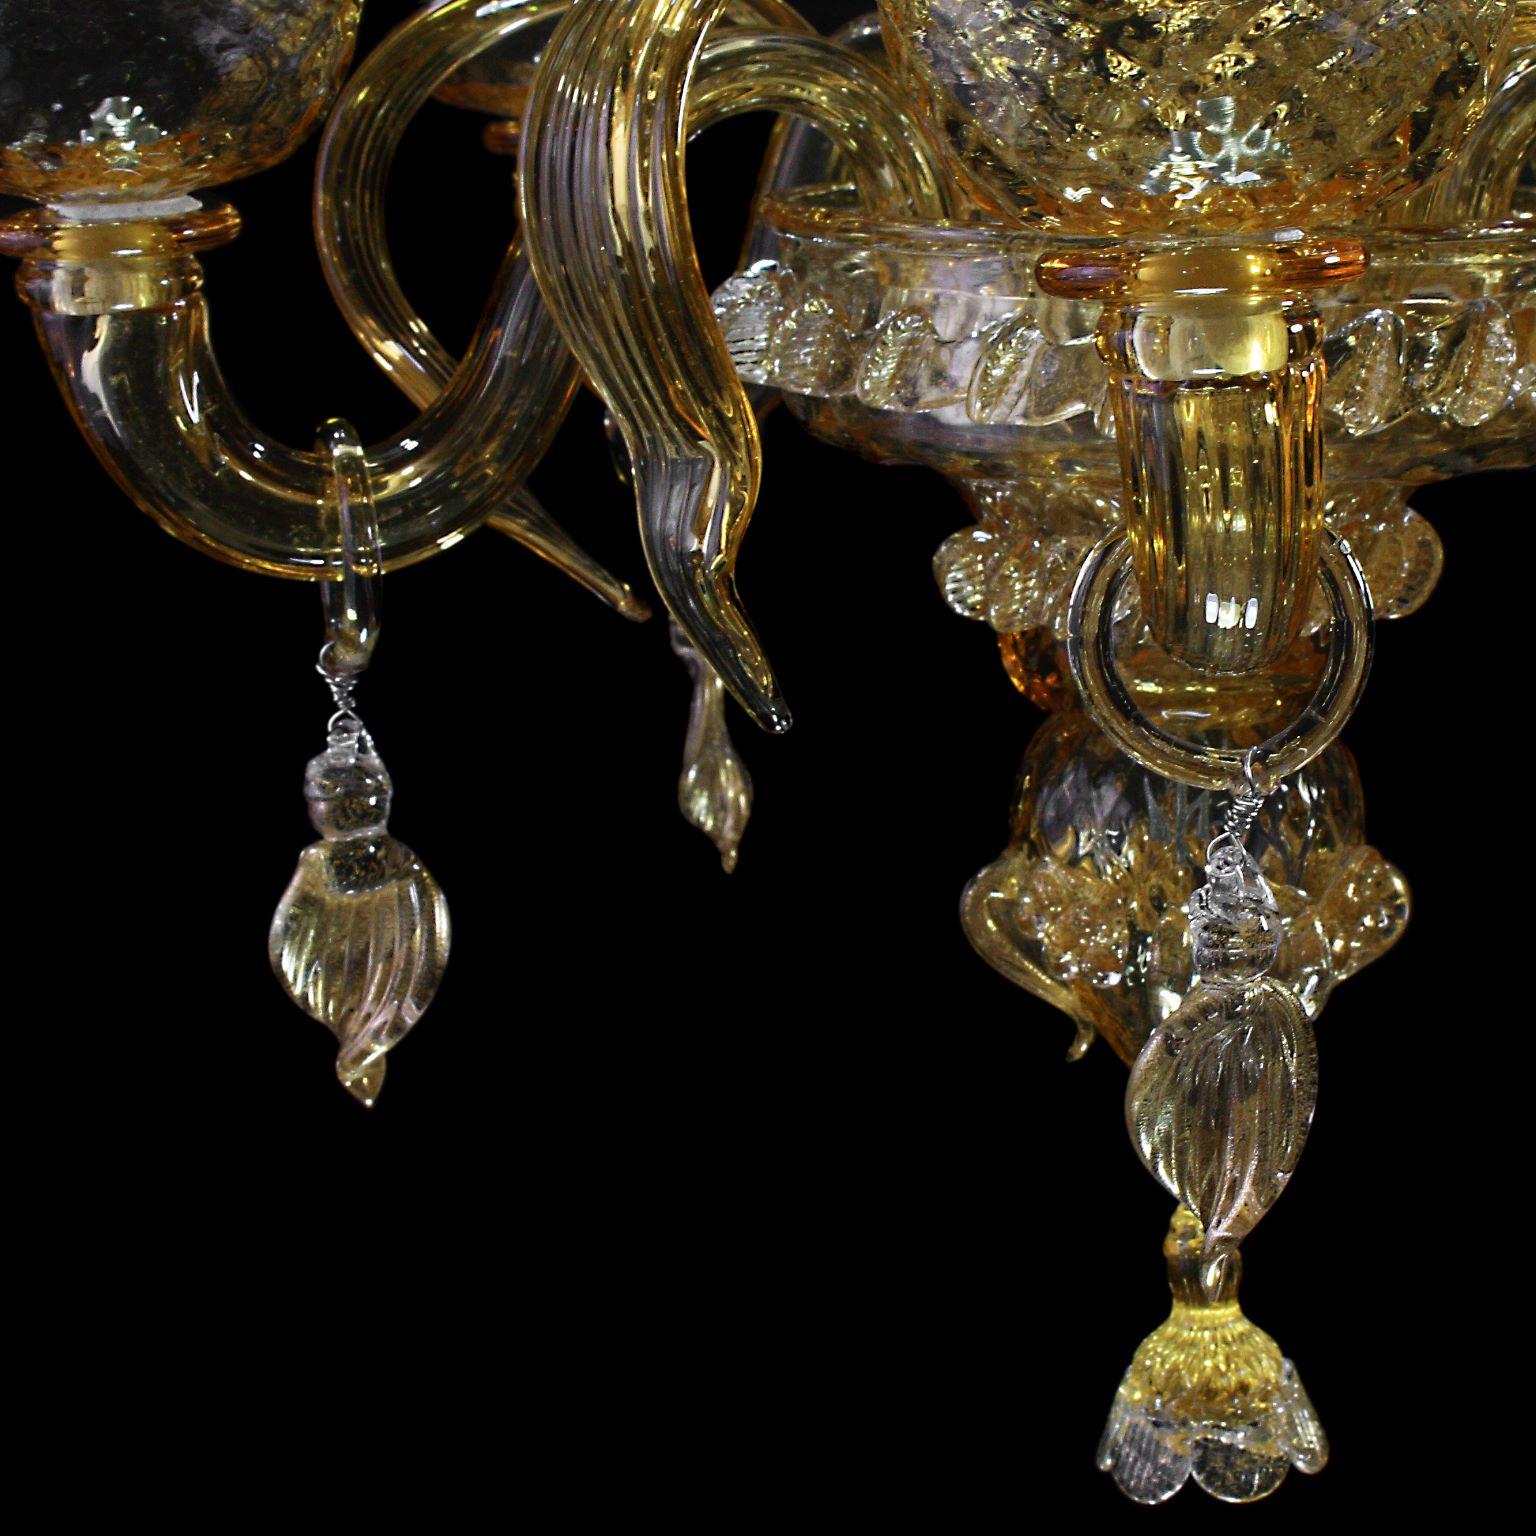 Artistic chandelier 5 arms in amber Murano glass and gold details Springtime.
The peculiar characteristic of this lighting work is the richness of its decorations. 
Springtime reflects the authentic murano glass tradition, which has become famous